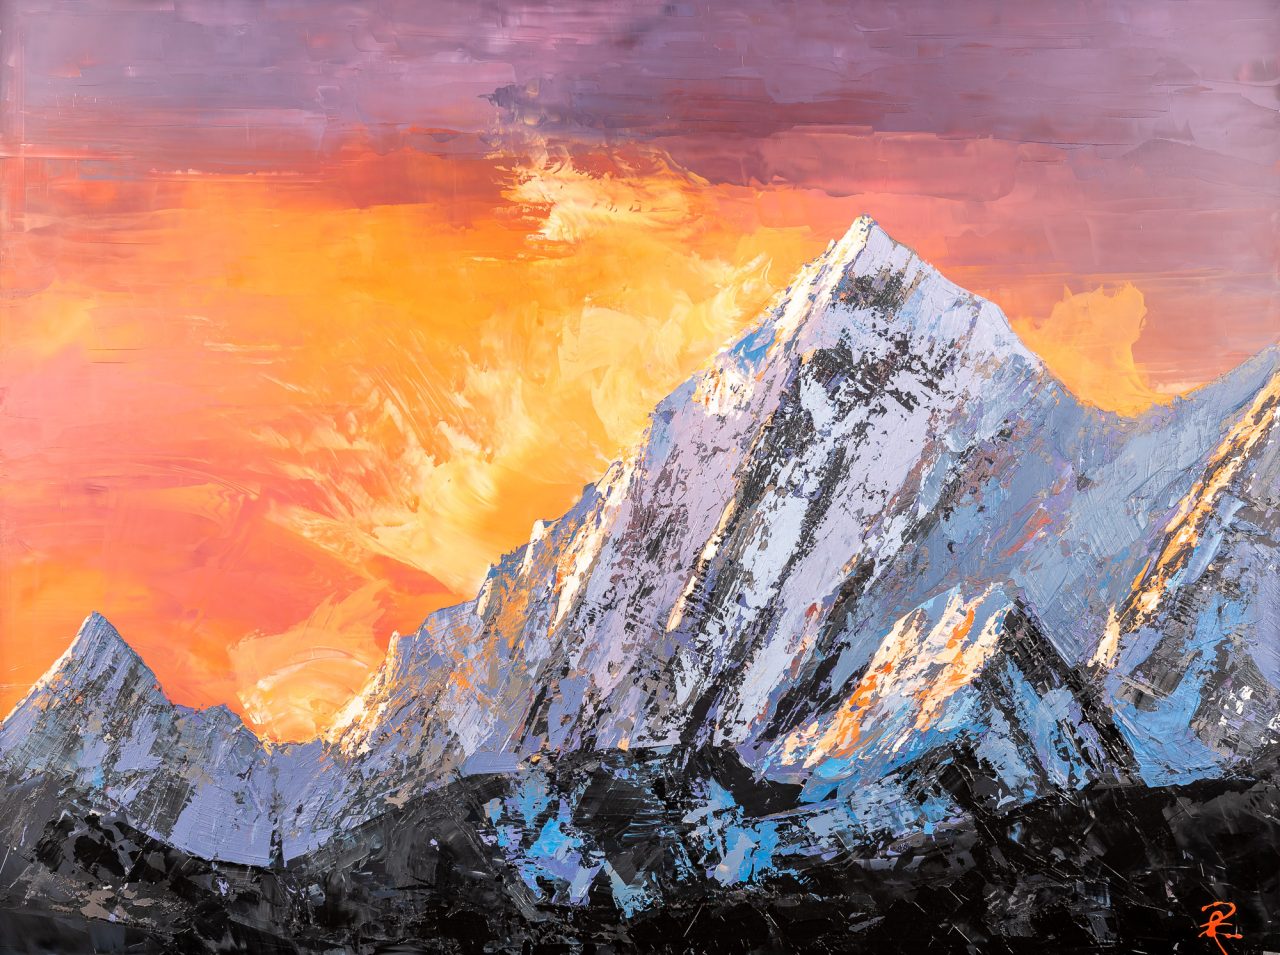 Sunset Summit by Paul Kenton, UK Contemporary artist, a K2 Mountain view original painting from his Oceans and Mountainscapes Art Collection